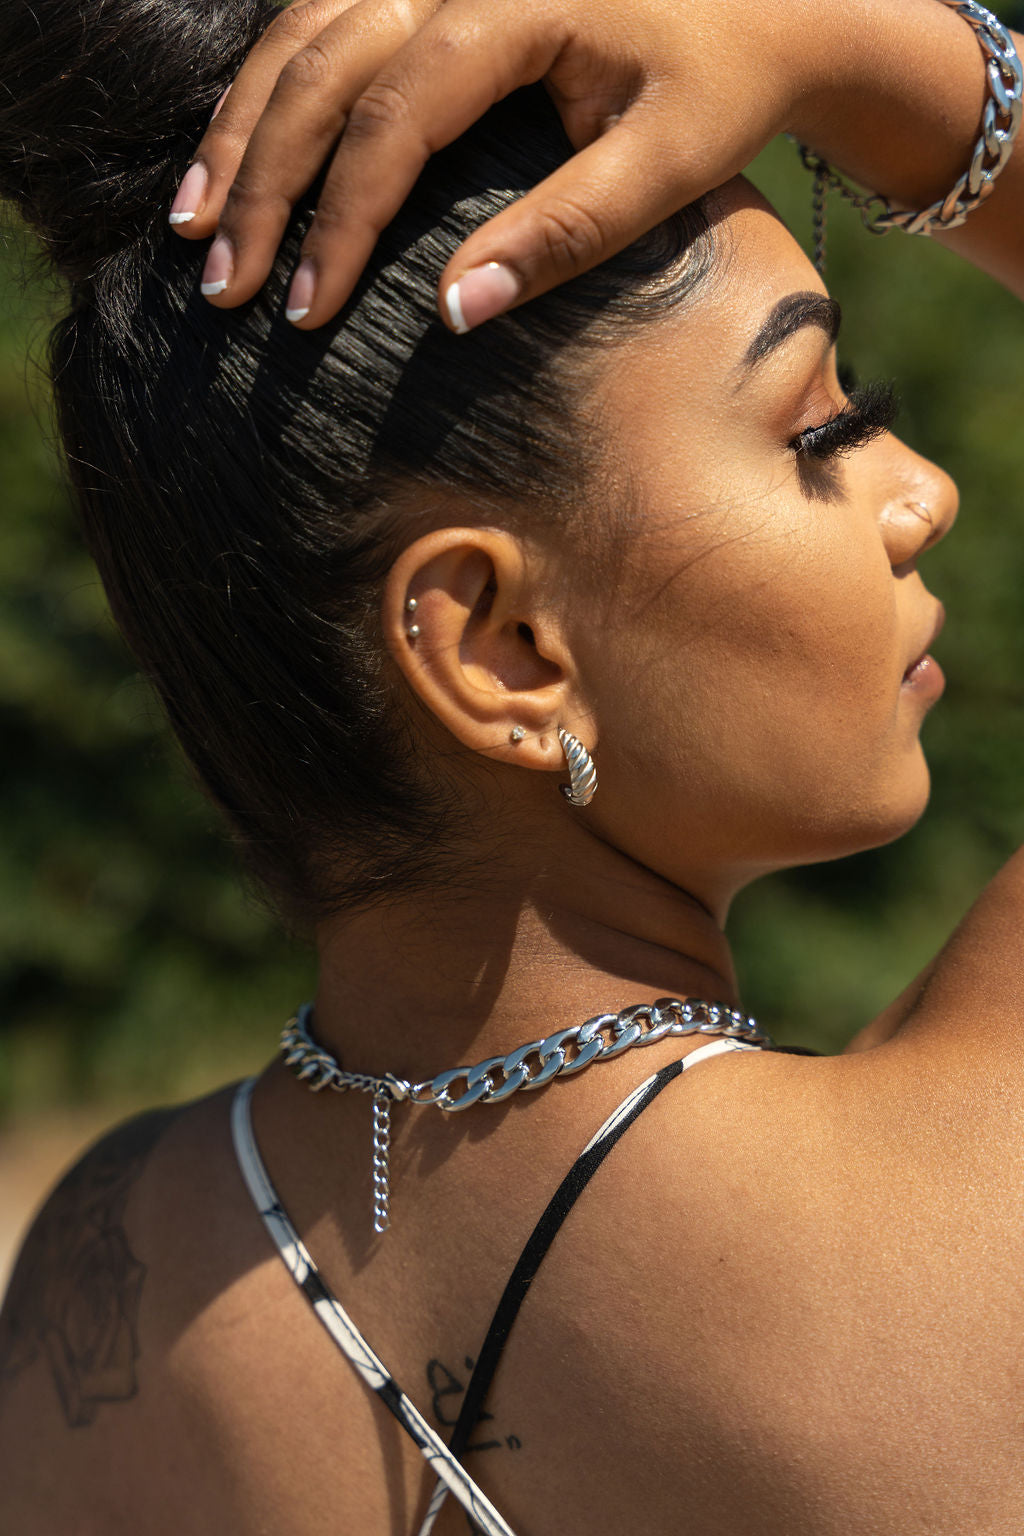 Model wearing 18k silver croissant shaped earrings. She is also wearing silver chain bracelet and necklaces. Thick Croissant Stud Earrings - E's Element.